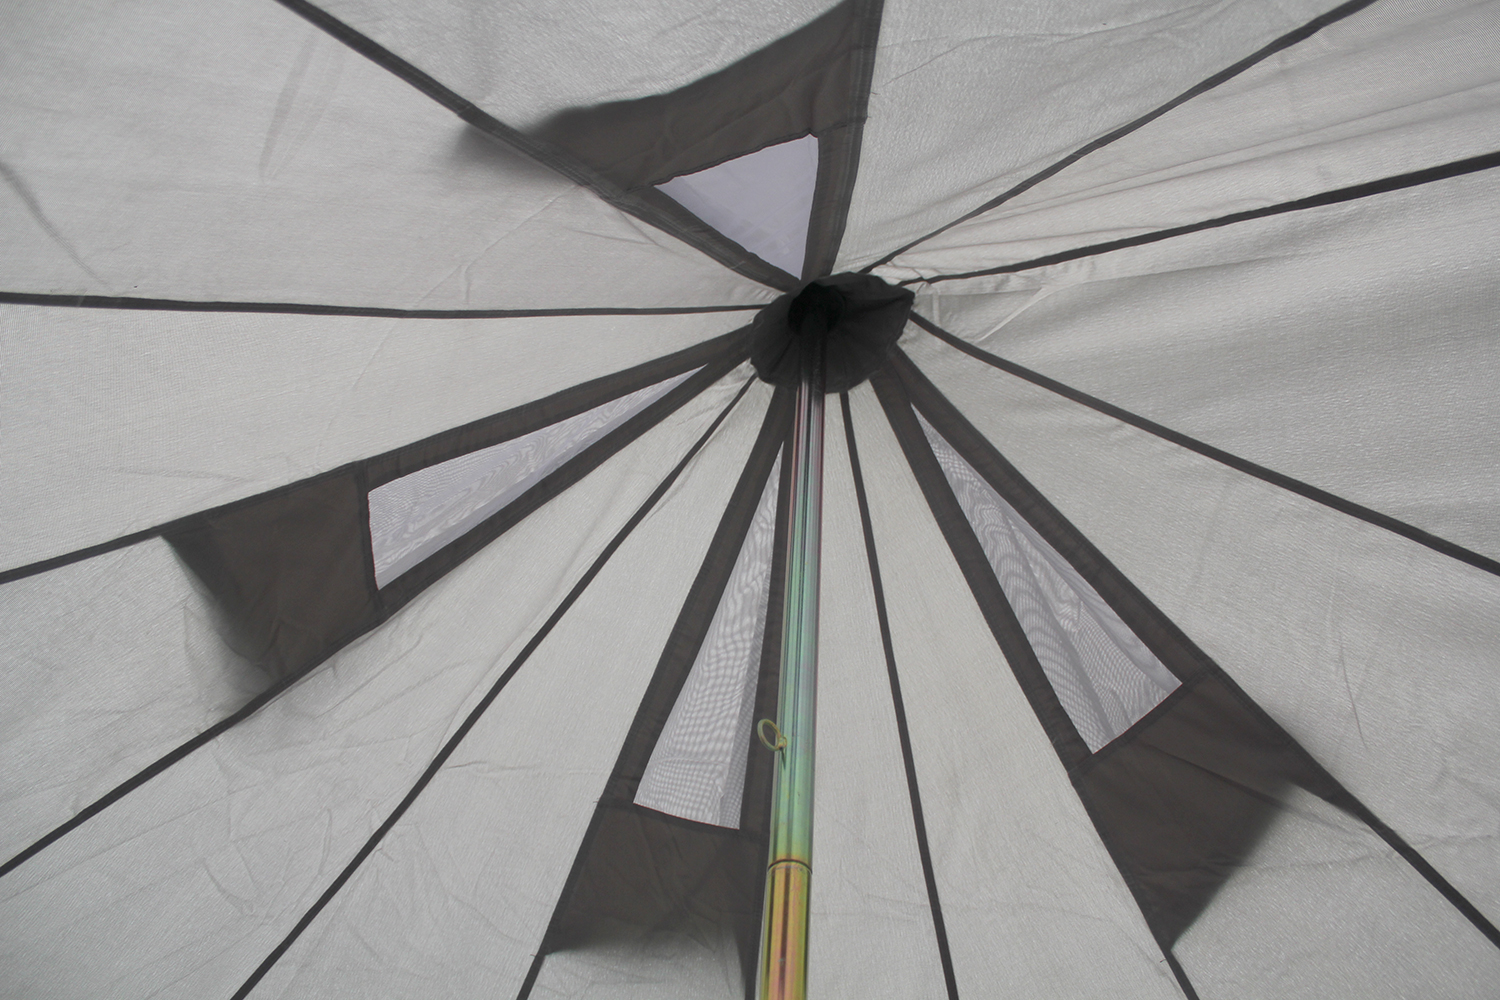 5m Oxford Bell Tent ceiling vents